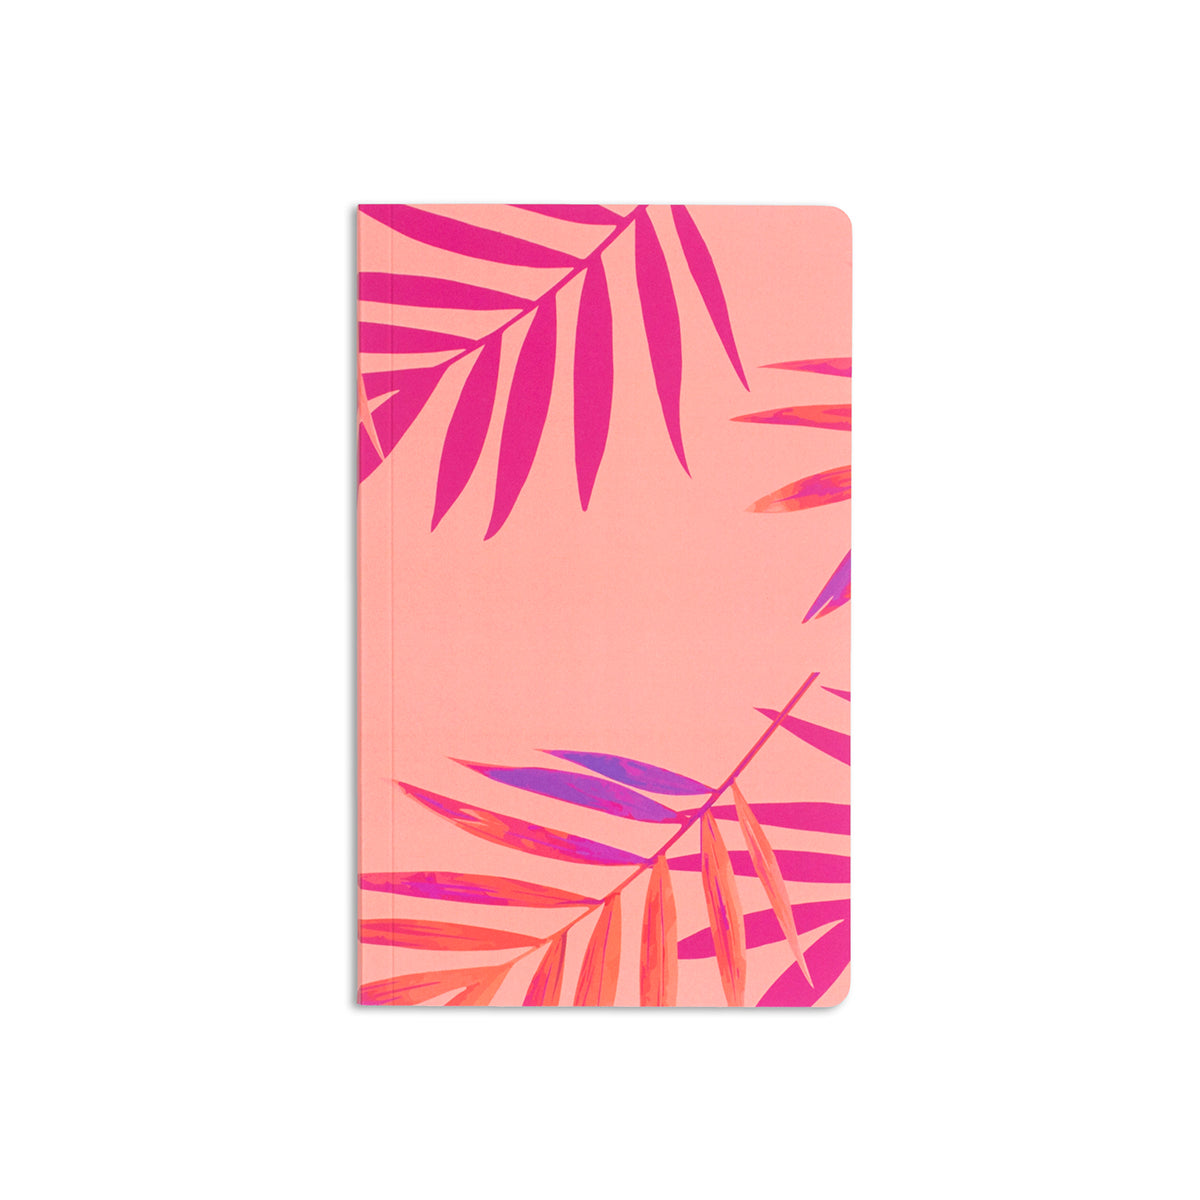 5" x 8.25" soft cover pink notebook with pink palm leaf design on the corners